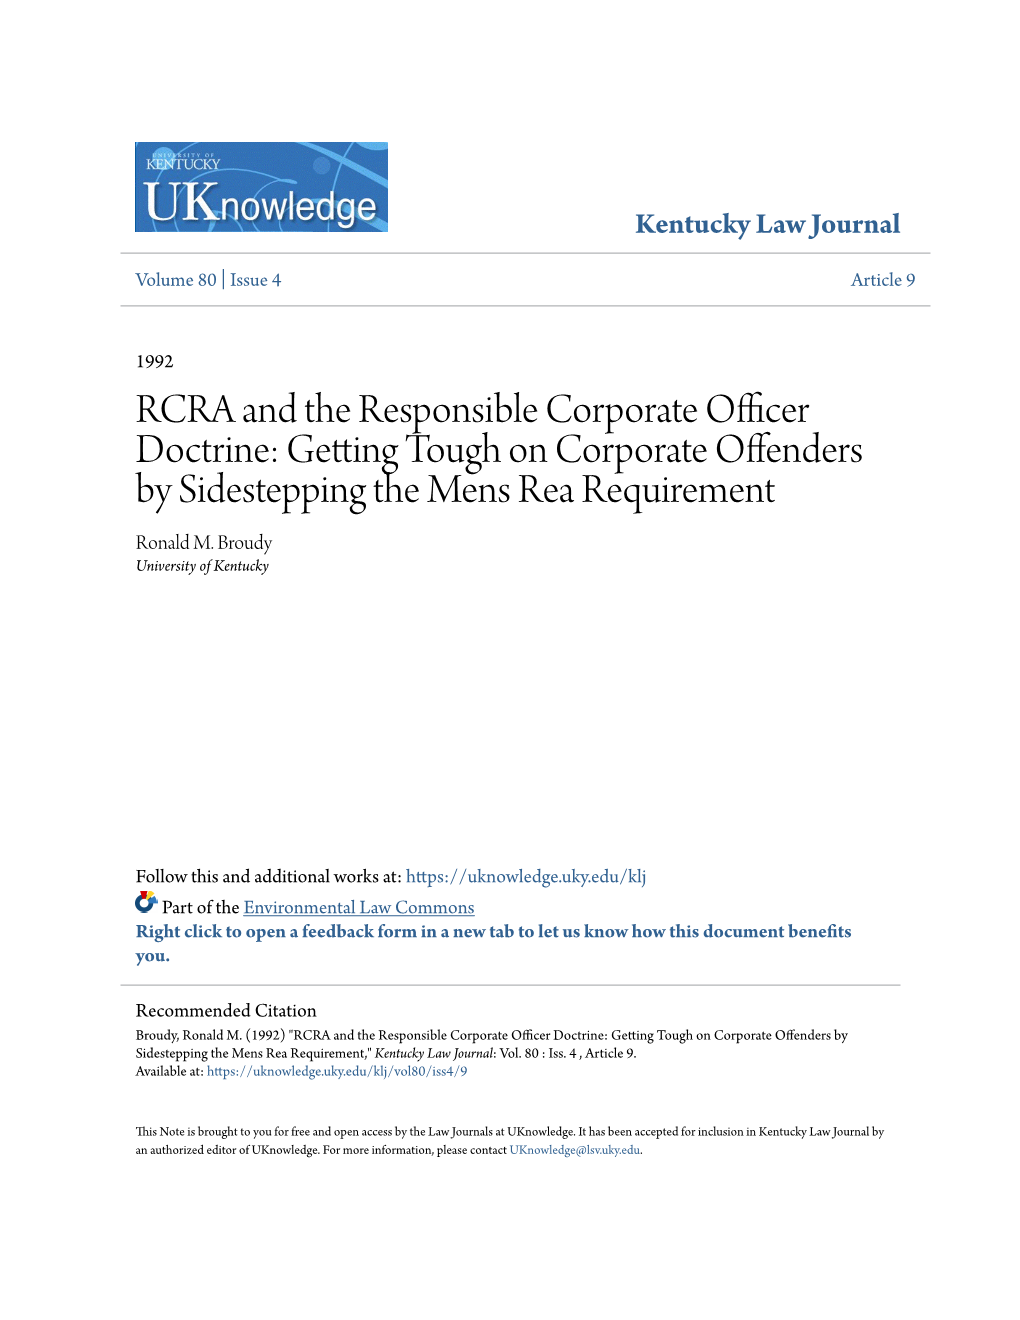 RCRA and the Responsible Corporate Officer Doctrine